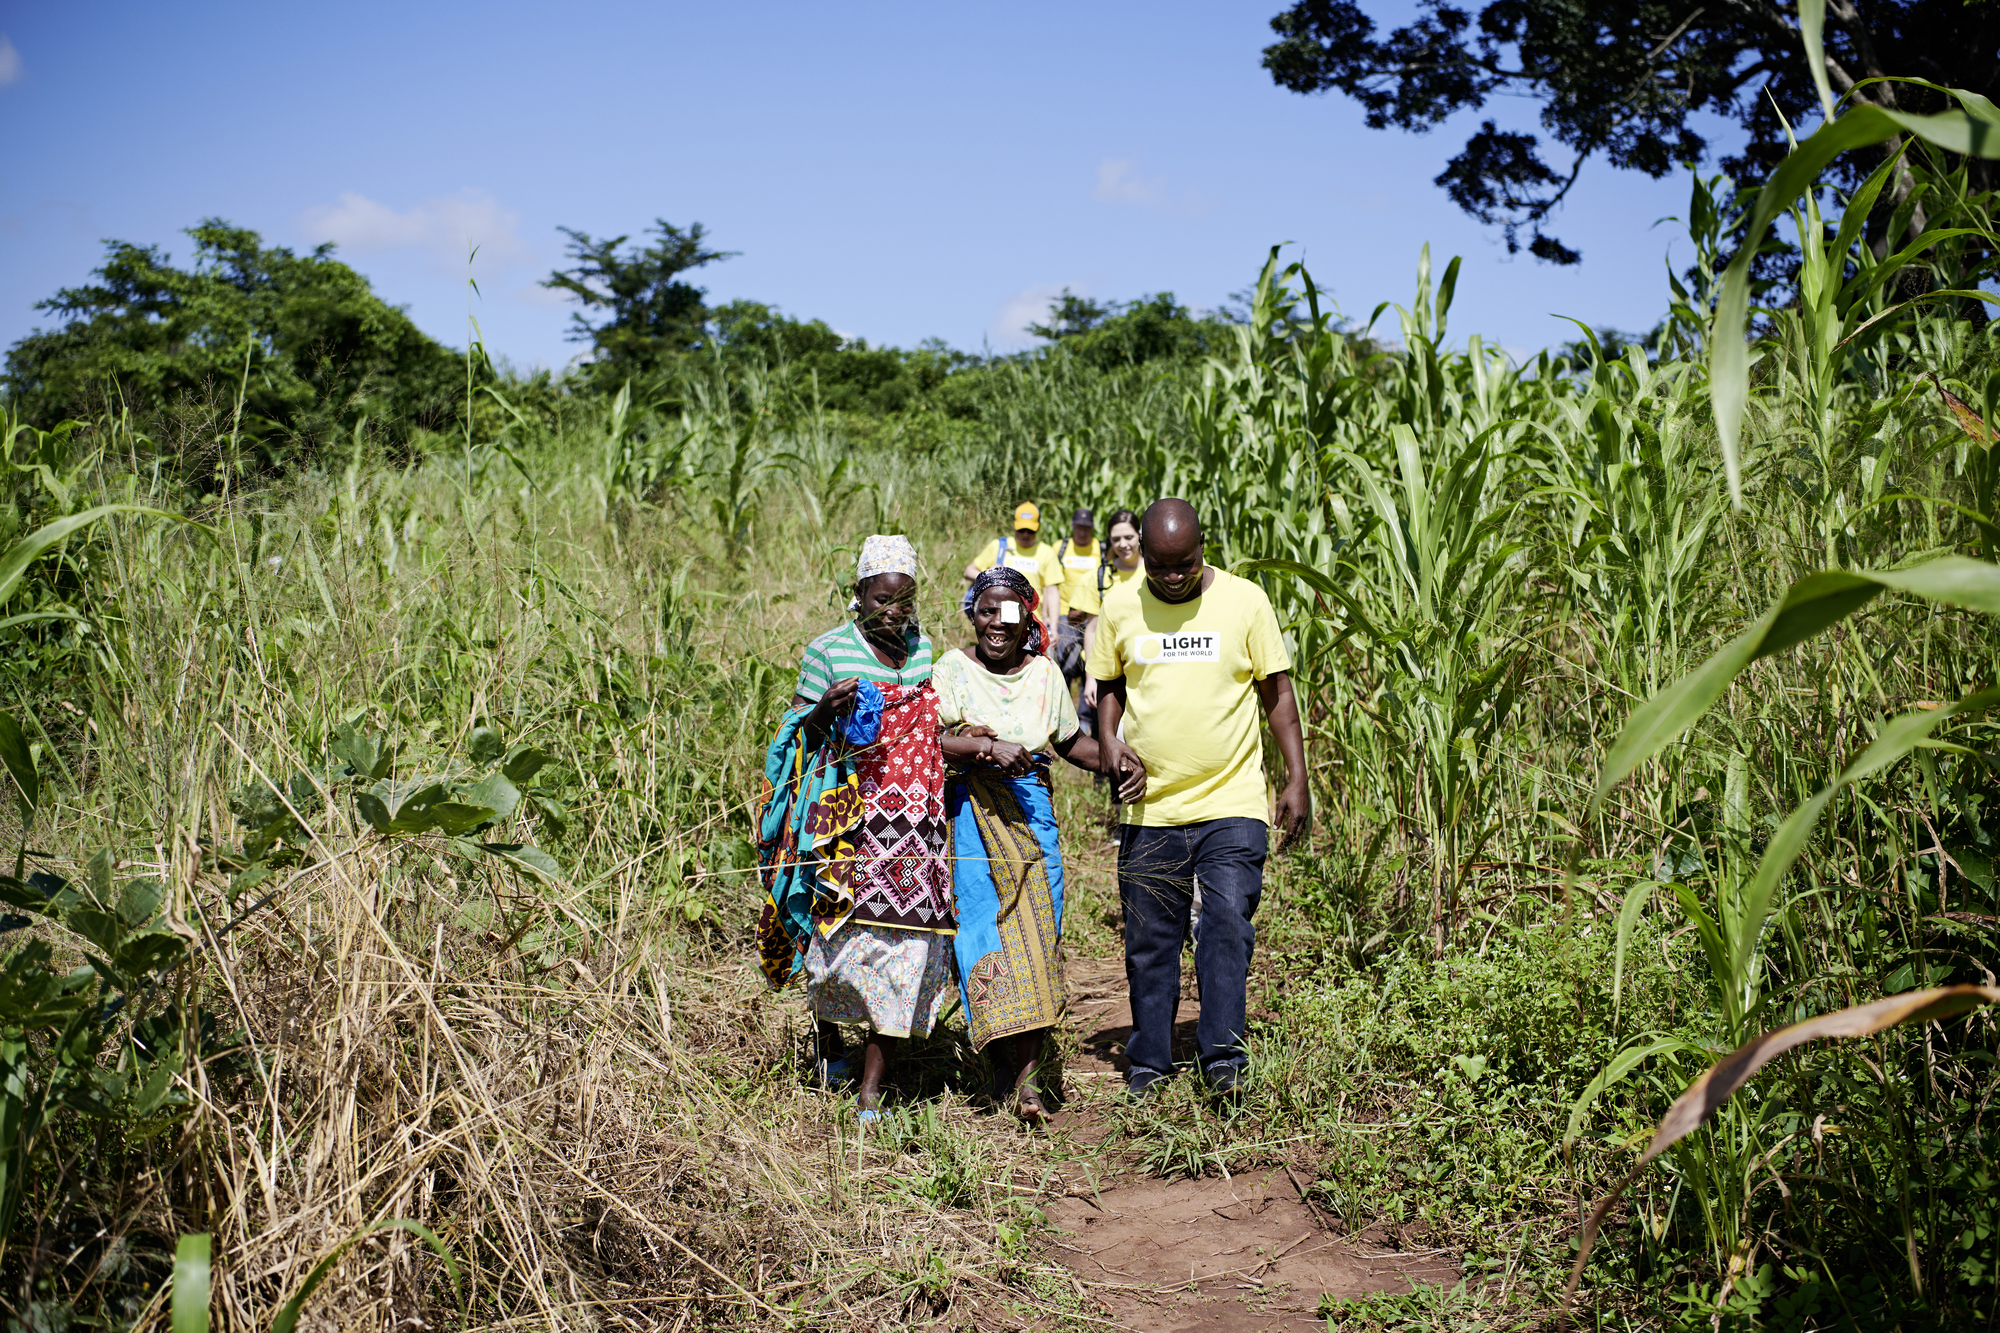 A slideshow image shows a woman being escorted back home after an operation. Next to her walks her relative and an aid worker from Light for the World in Mozambique. They accompany her through the fields back home.